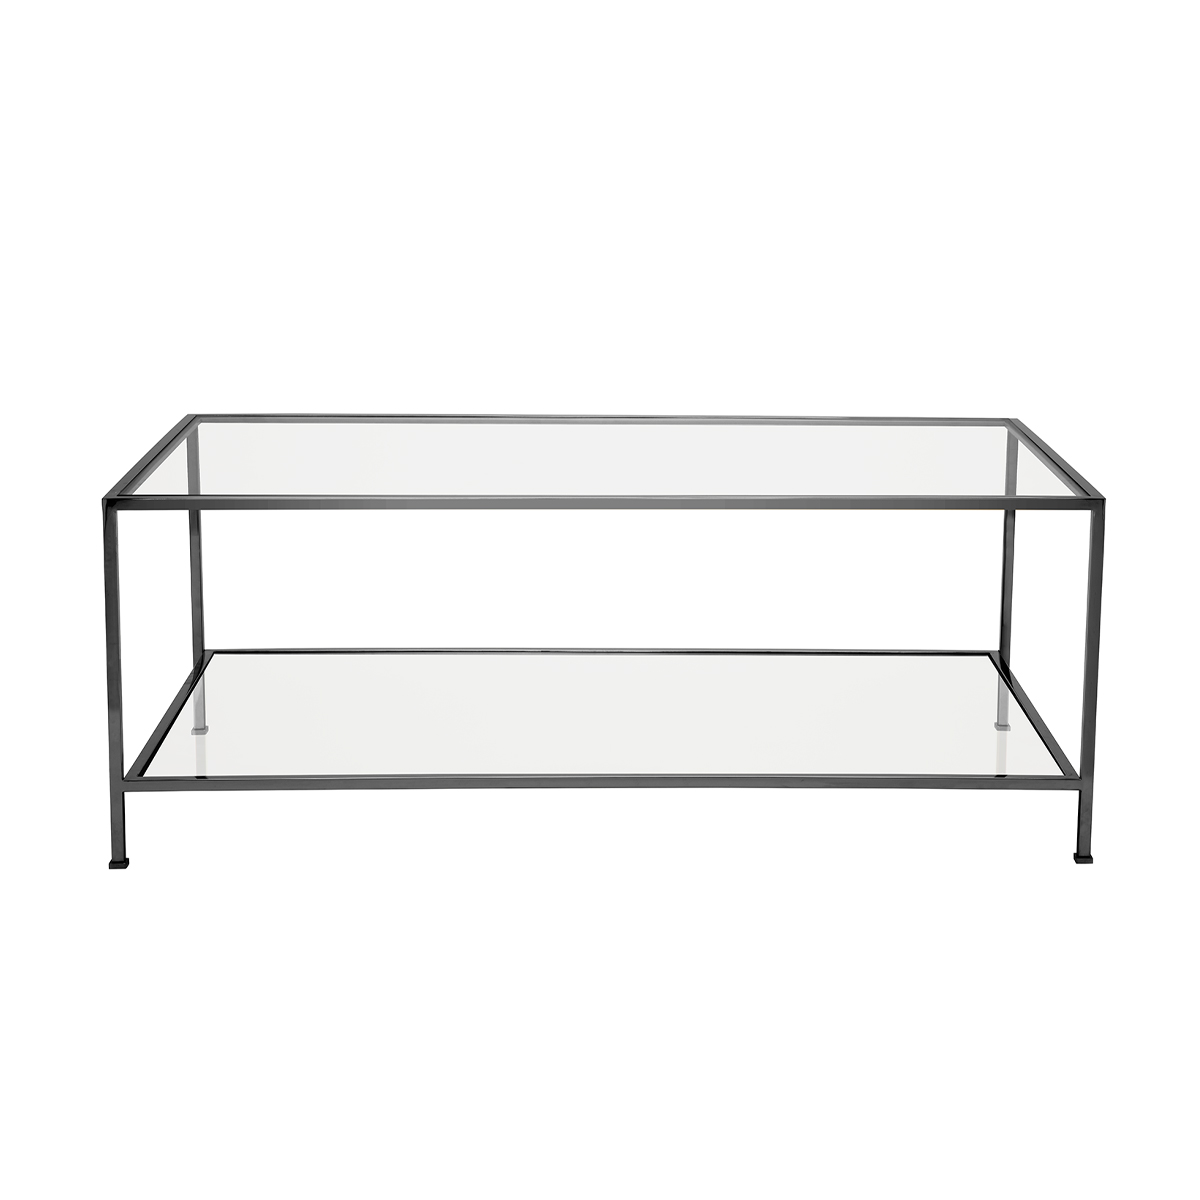 Wing Coffee Table – Black Chrome